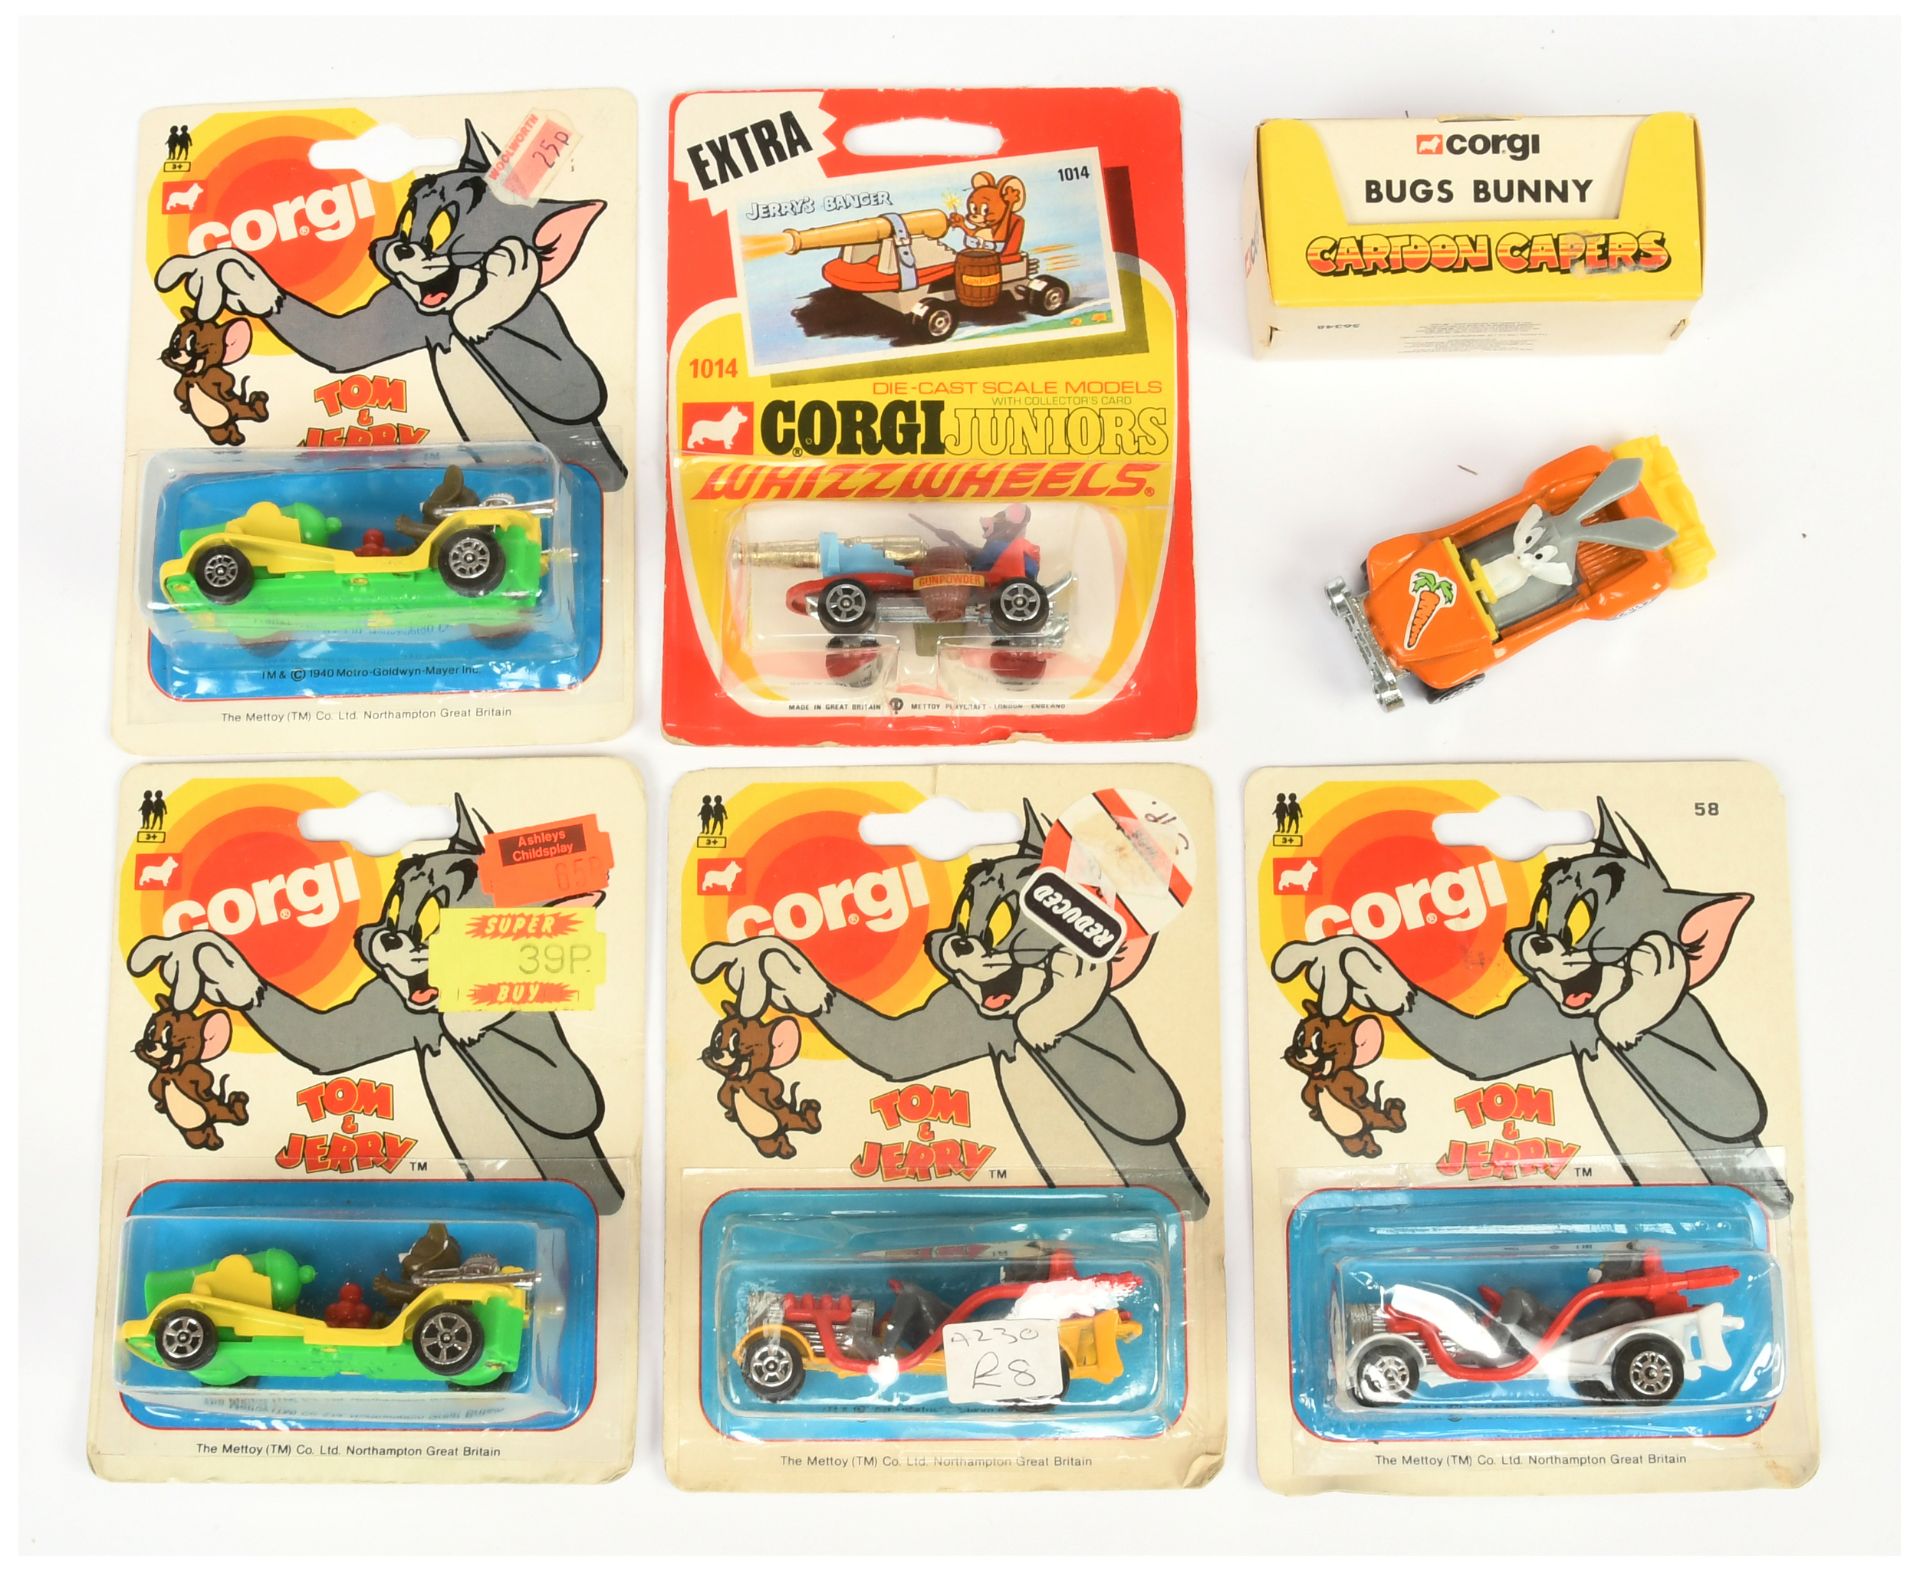 Corgi Juniors Group Of 6 To Include (1) "Tom's" Car - Yellow body, (2) Another but White body, (3...